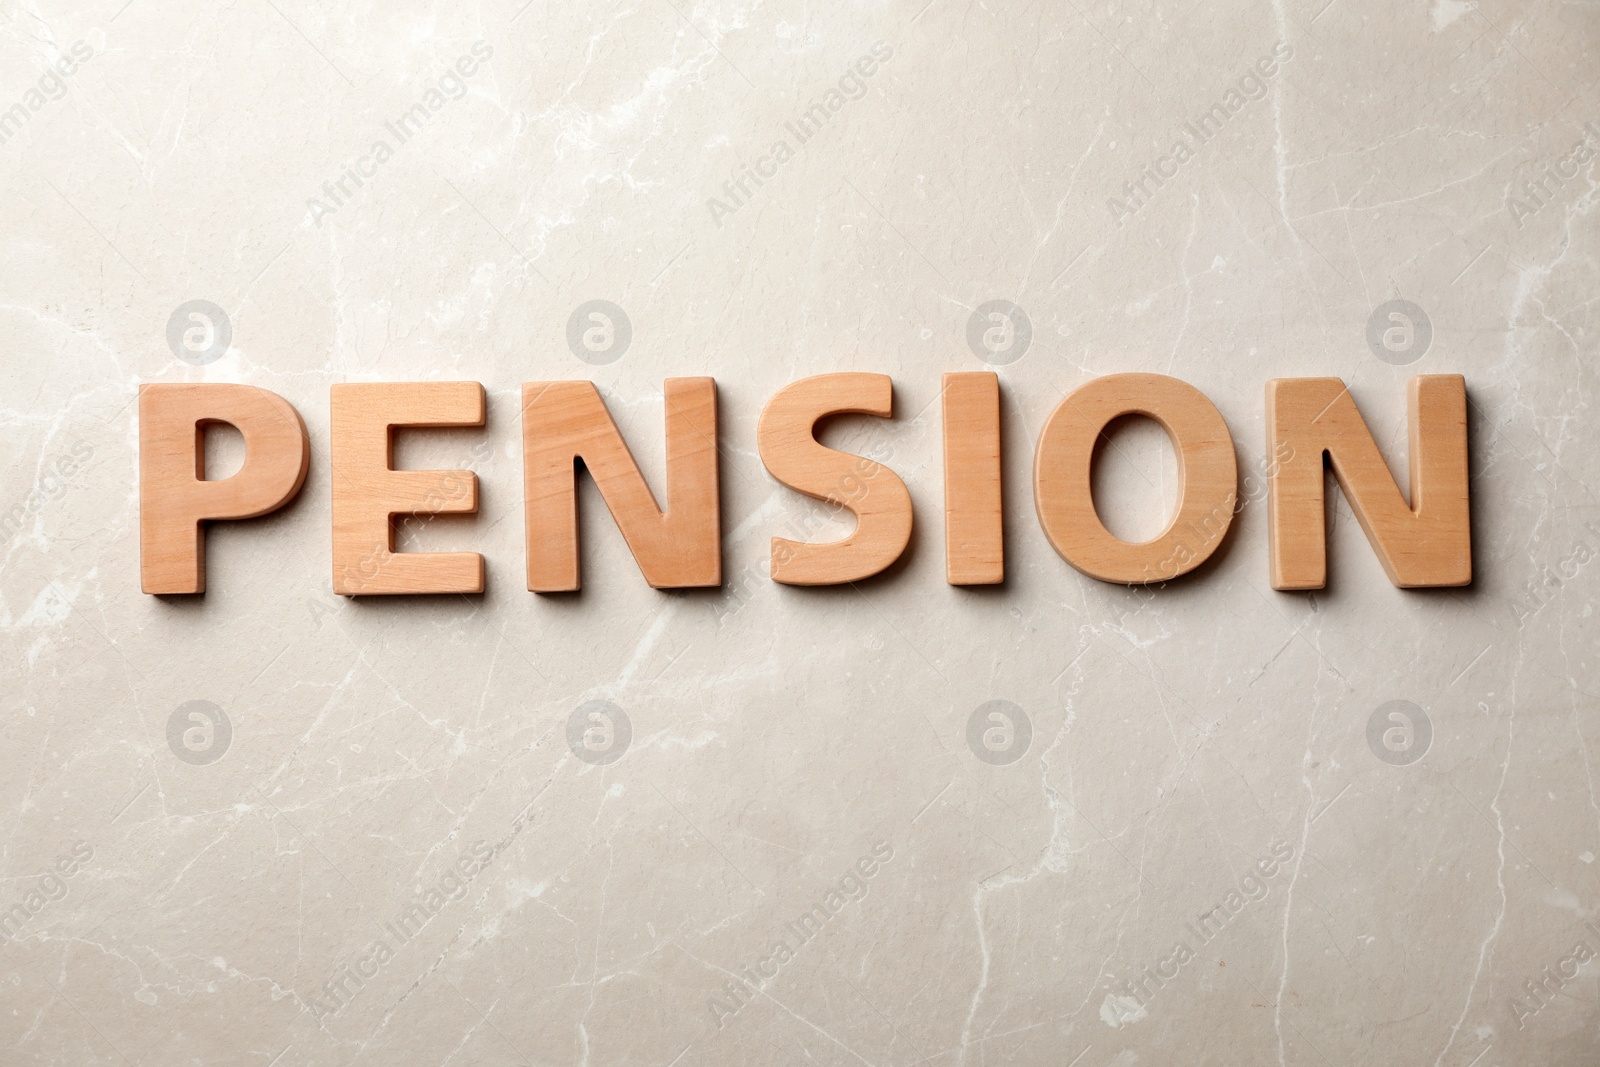 Photo of Word "PENSION" made of wooden letters on gray background